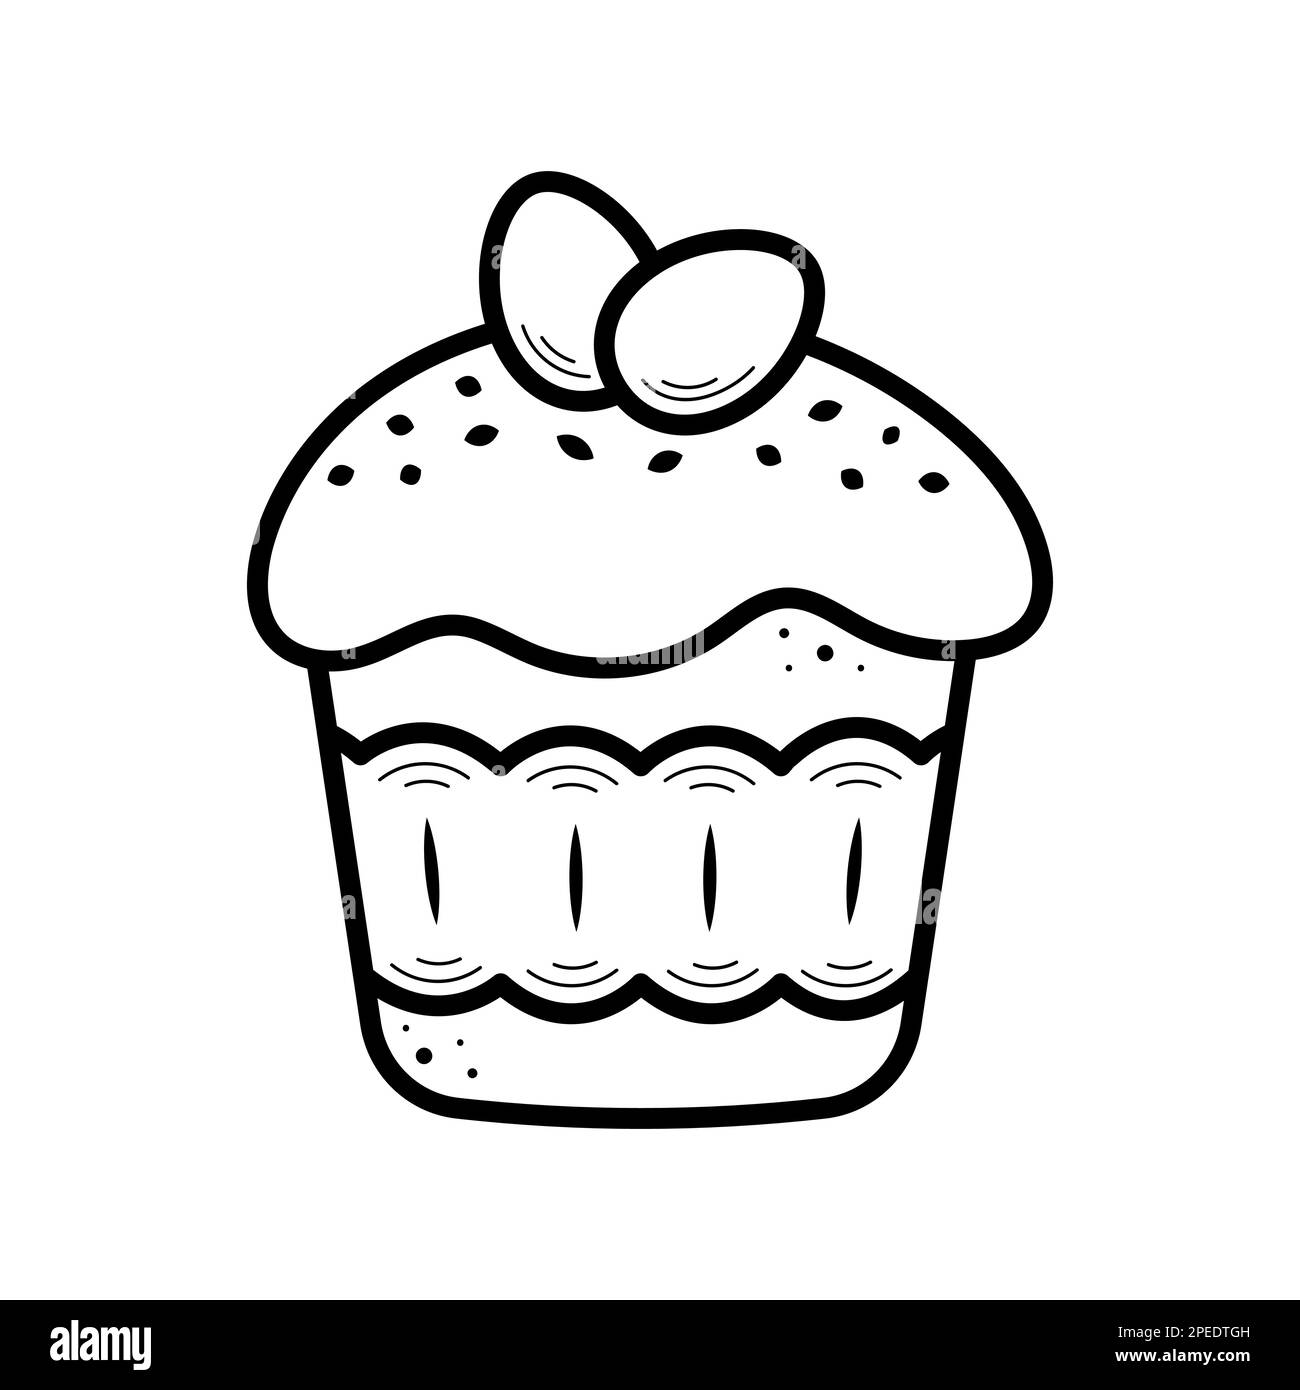 Easter cake. Hand drawn simple icon in sketch style. Isolated vector illustration in doodle line style. Stock Vector